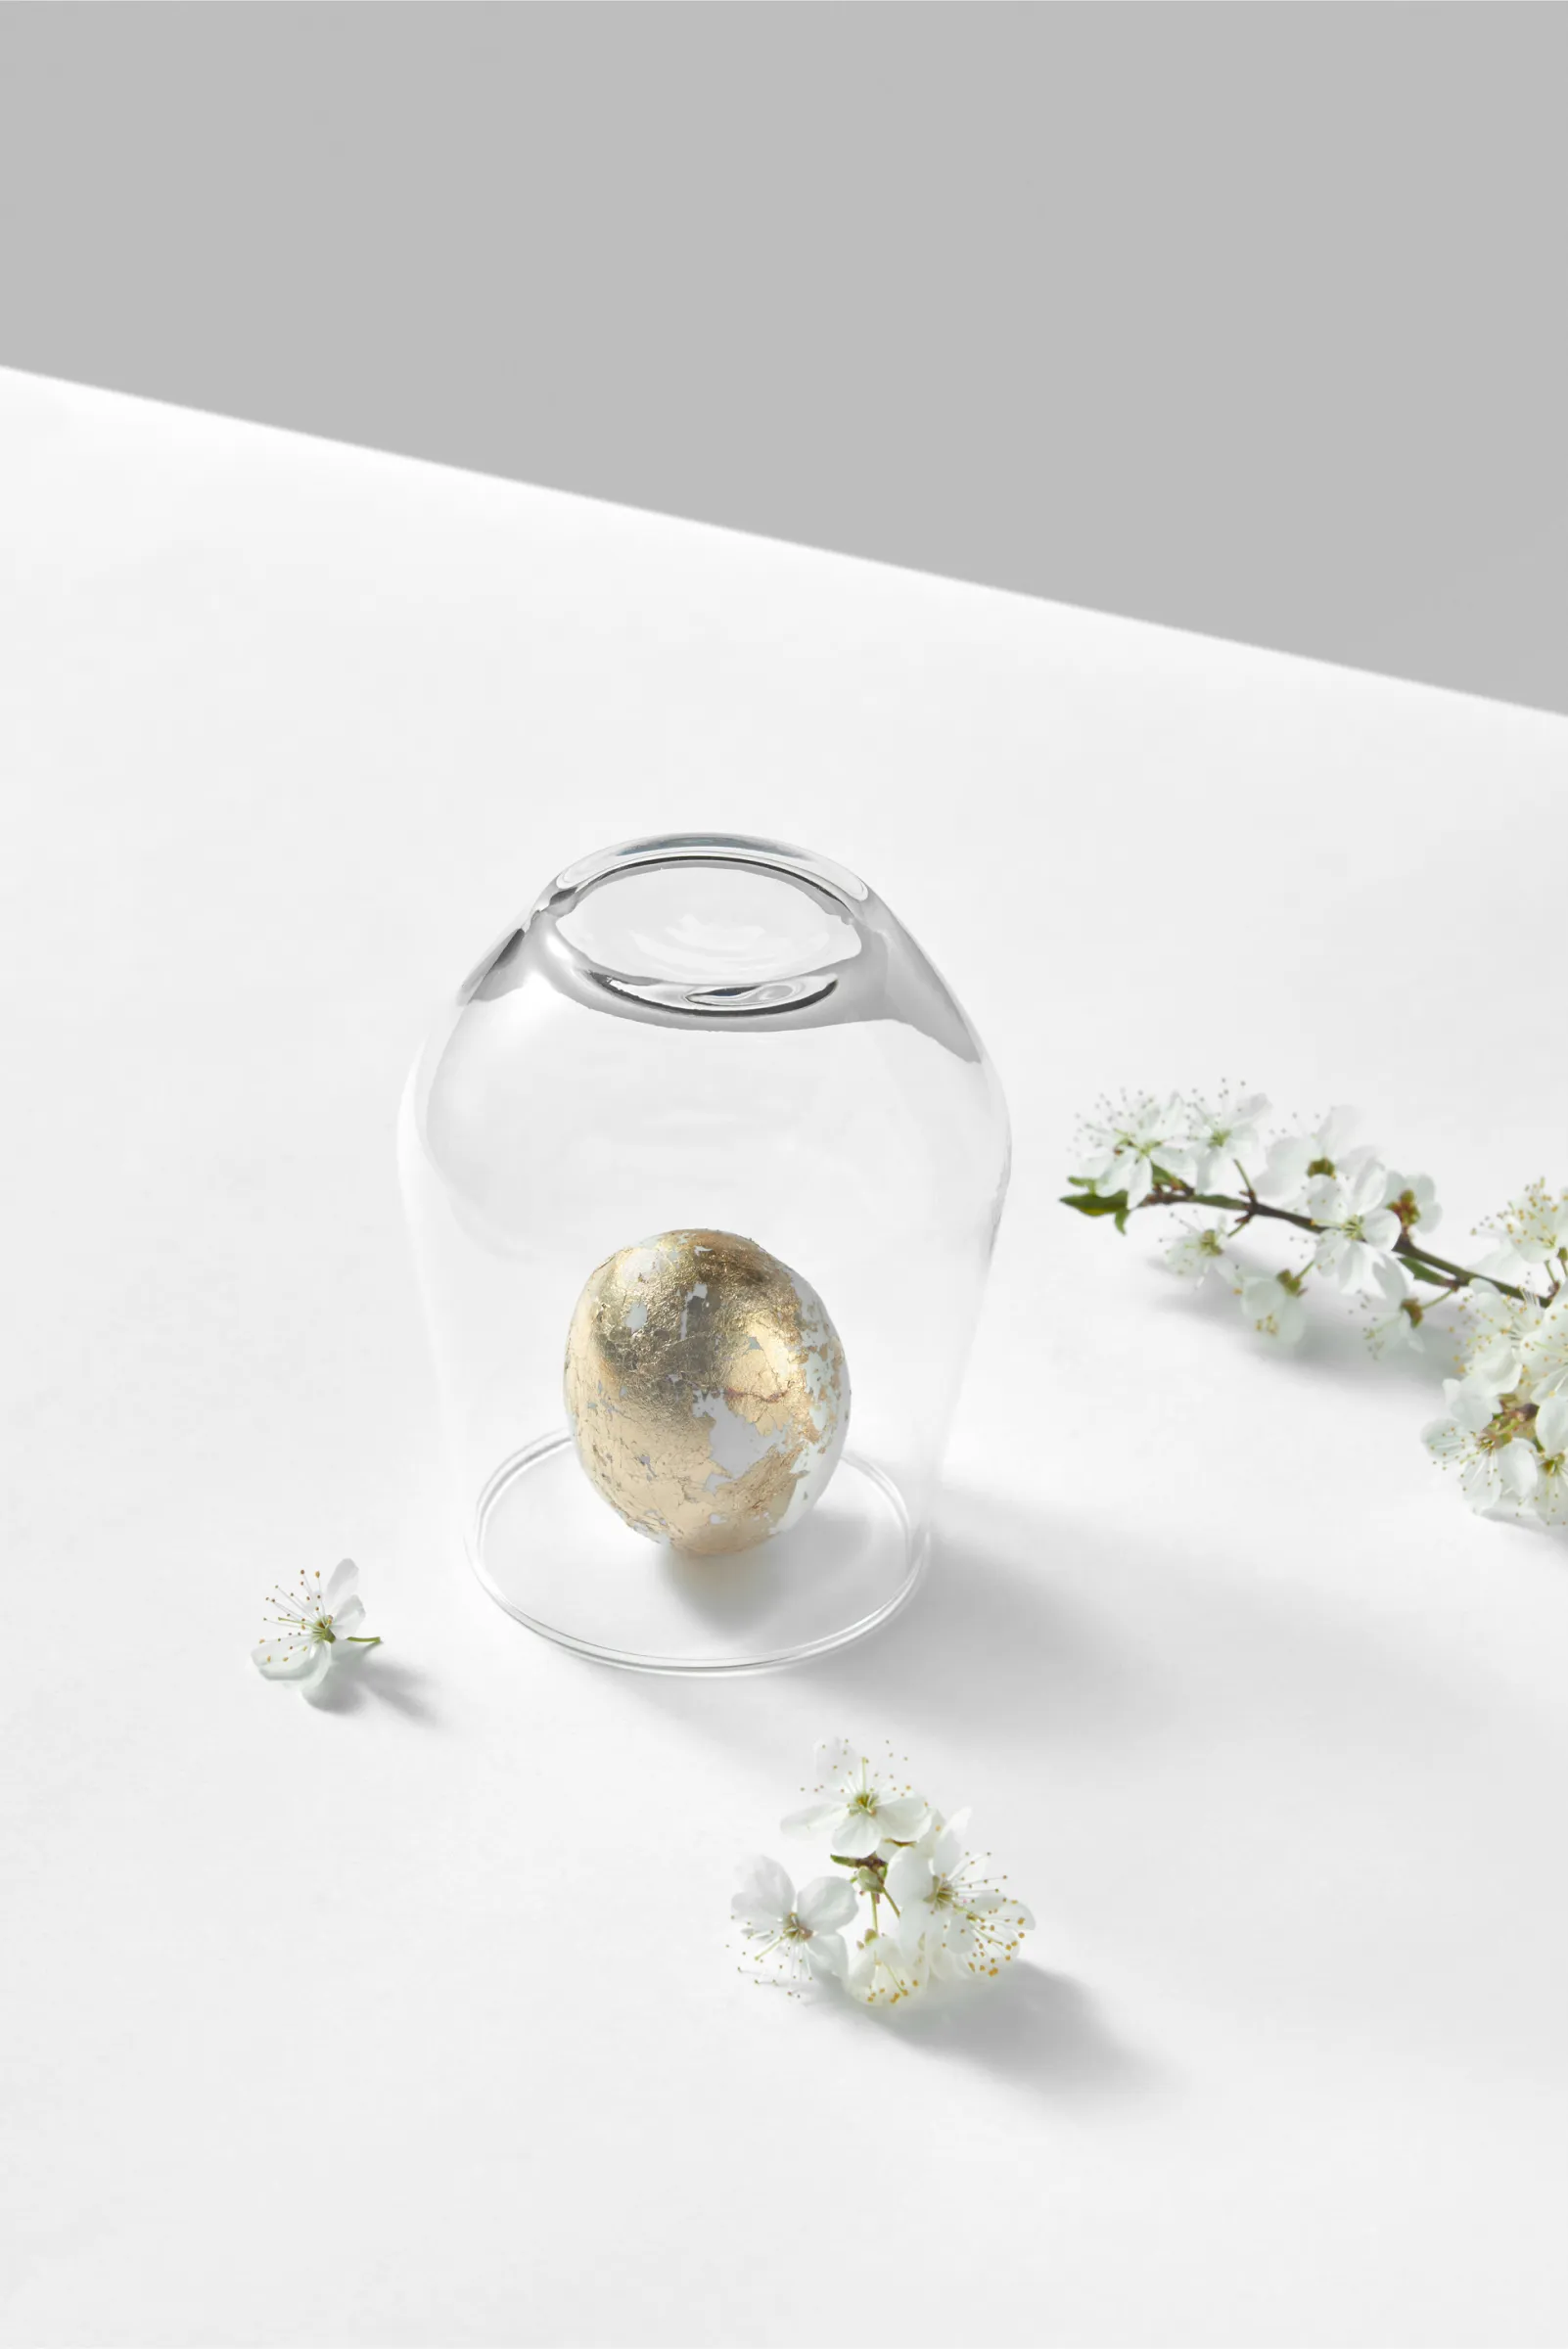 A golden speckled egg displayed under a clear glass cloche, accompanied by delicate white blossoms on a clean, white surface with a soft gray background.